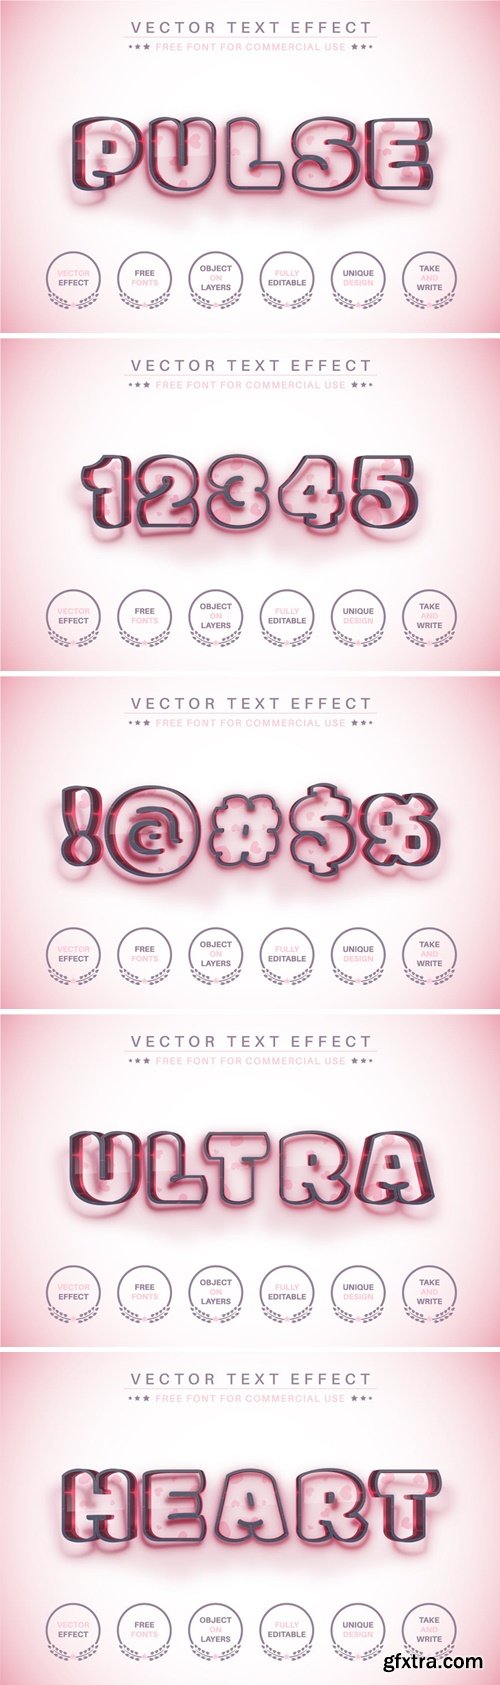 Heart Outline - Editable Text Effect, Font Style